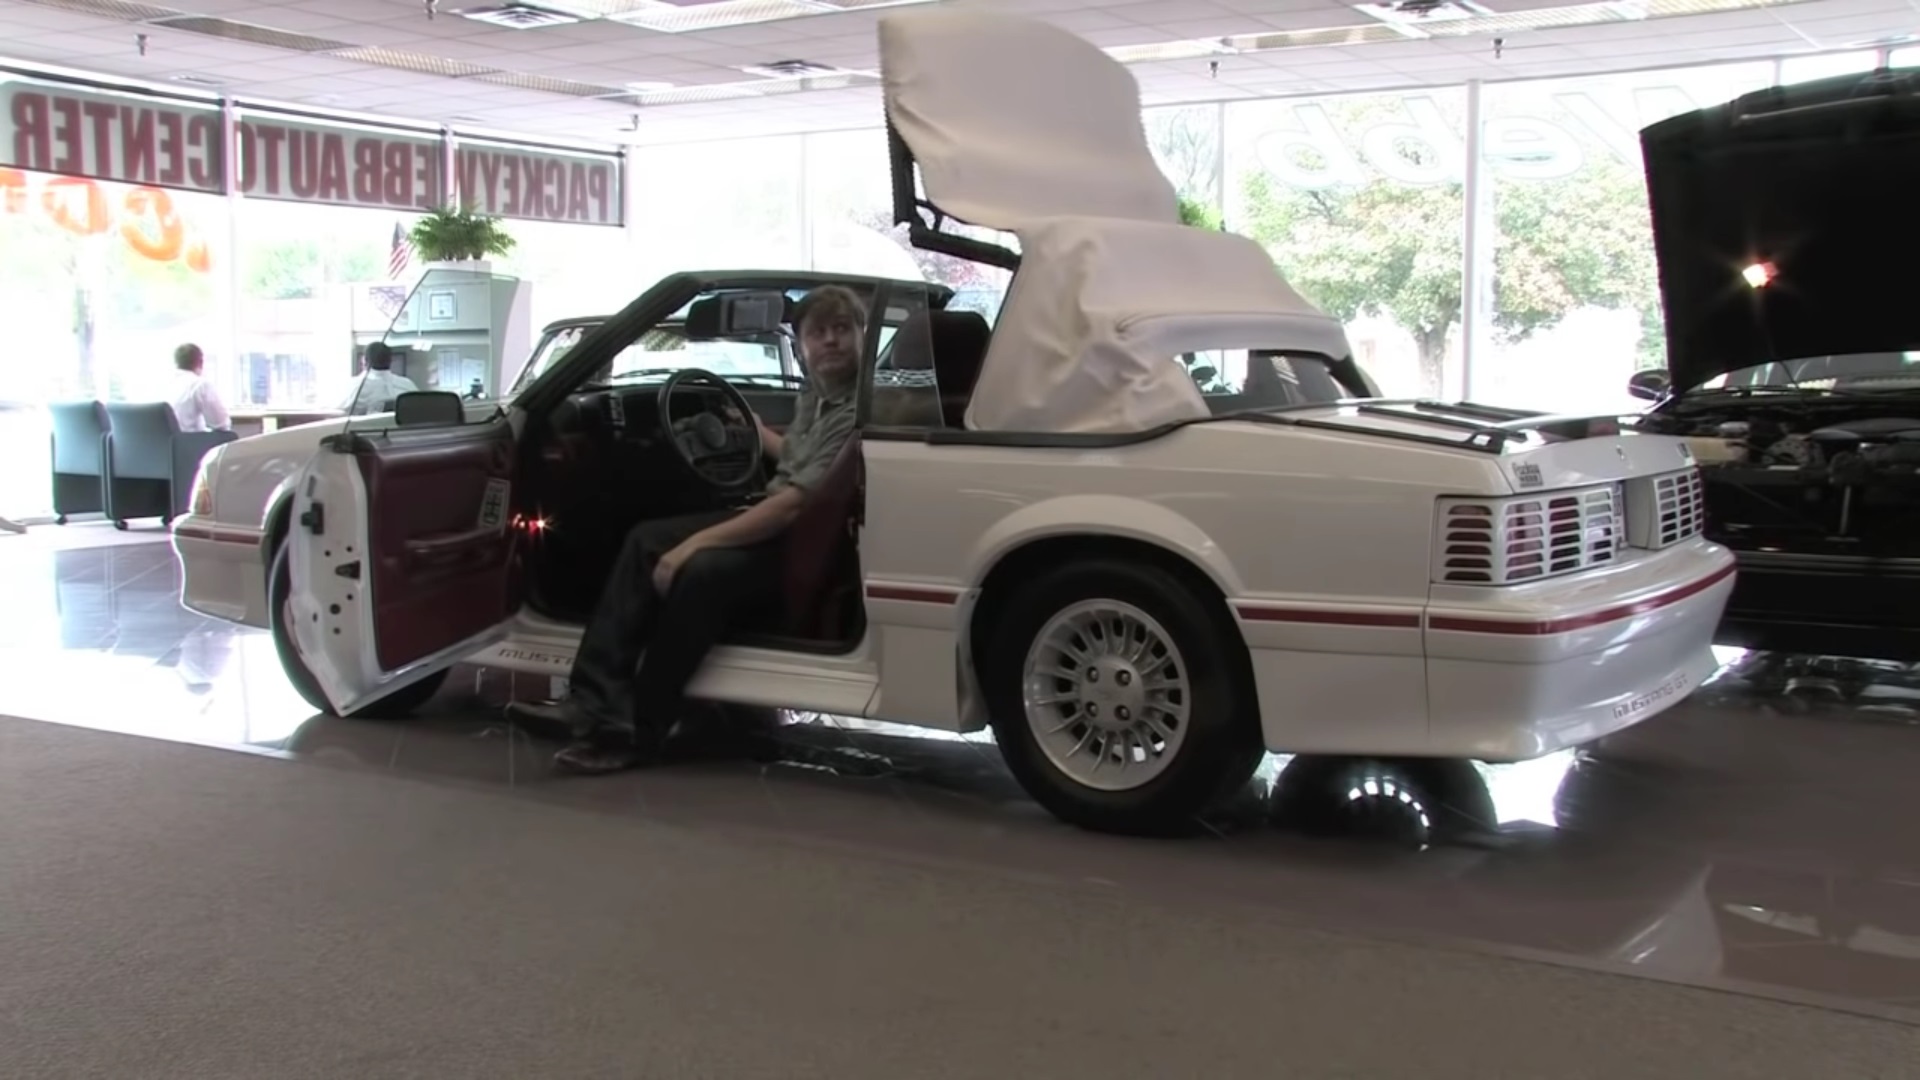 Video: 1988 Ford Mustang GT 5.0 Convertible Test Drive